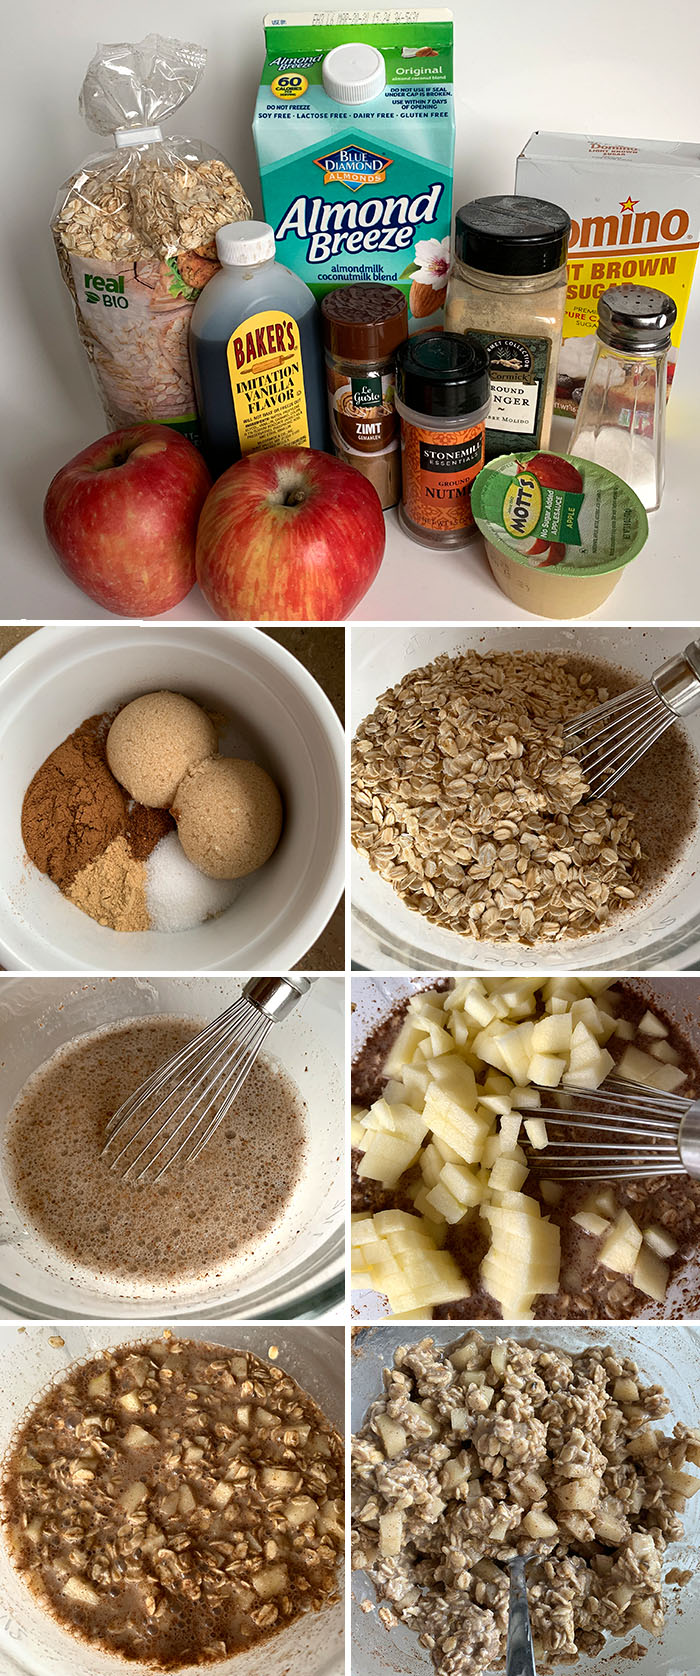 Step by step pictures of what is need to make Overnight Apple Pie Oats and also pictures of the steps